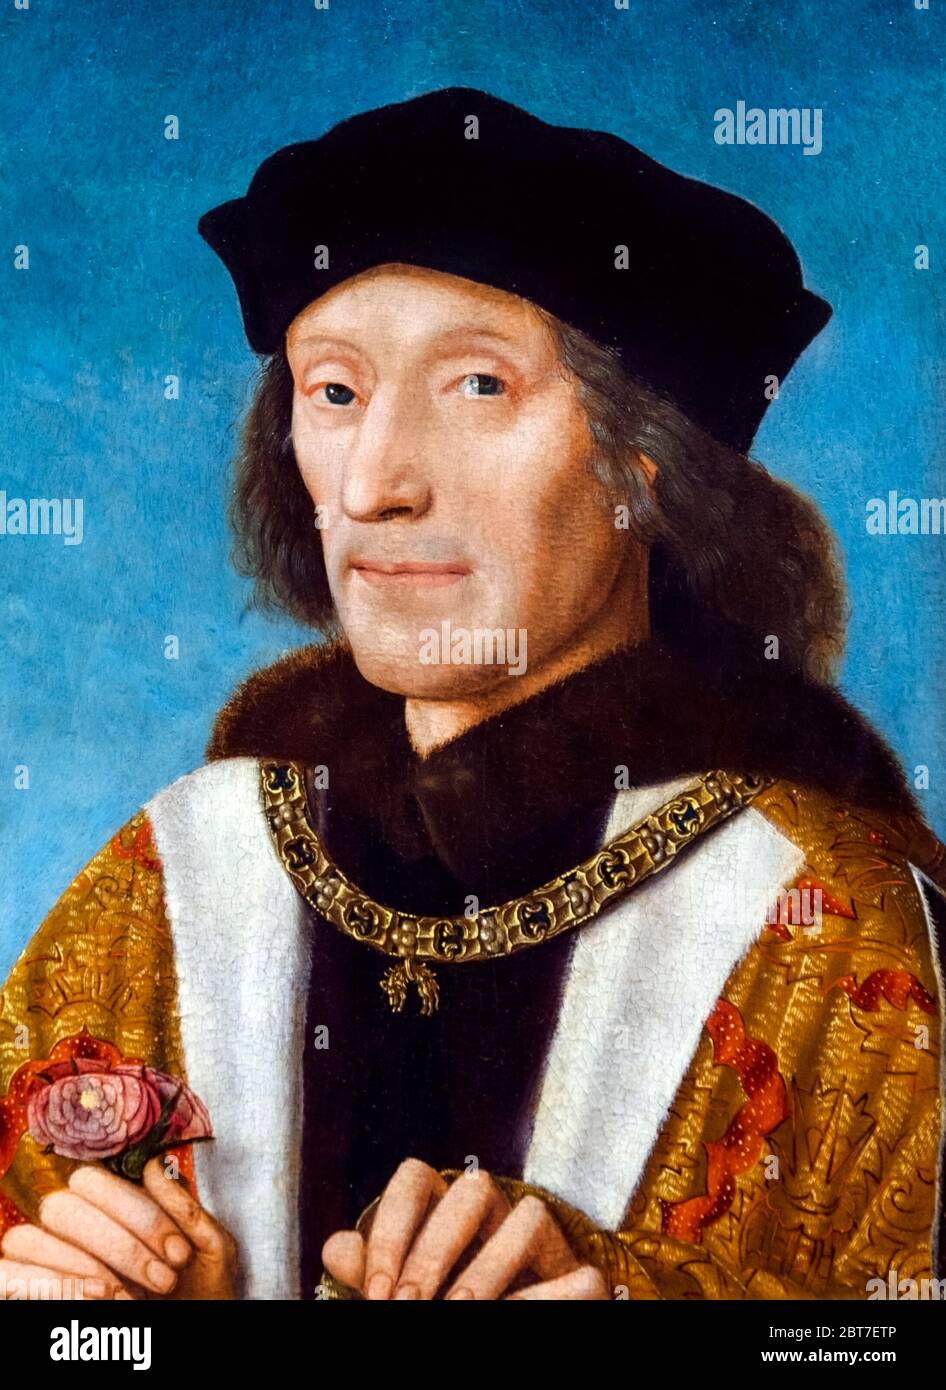 Henry VII. Portrait of King Henry VII (1457-1509), by an unknown Dutch artist, c.1505 Stock Photo